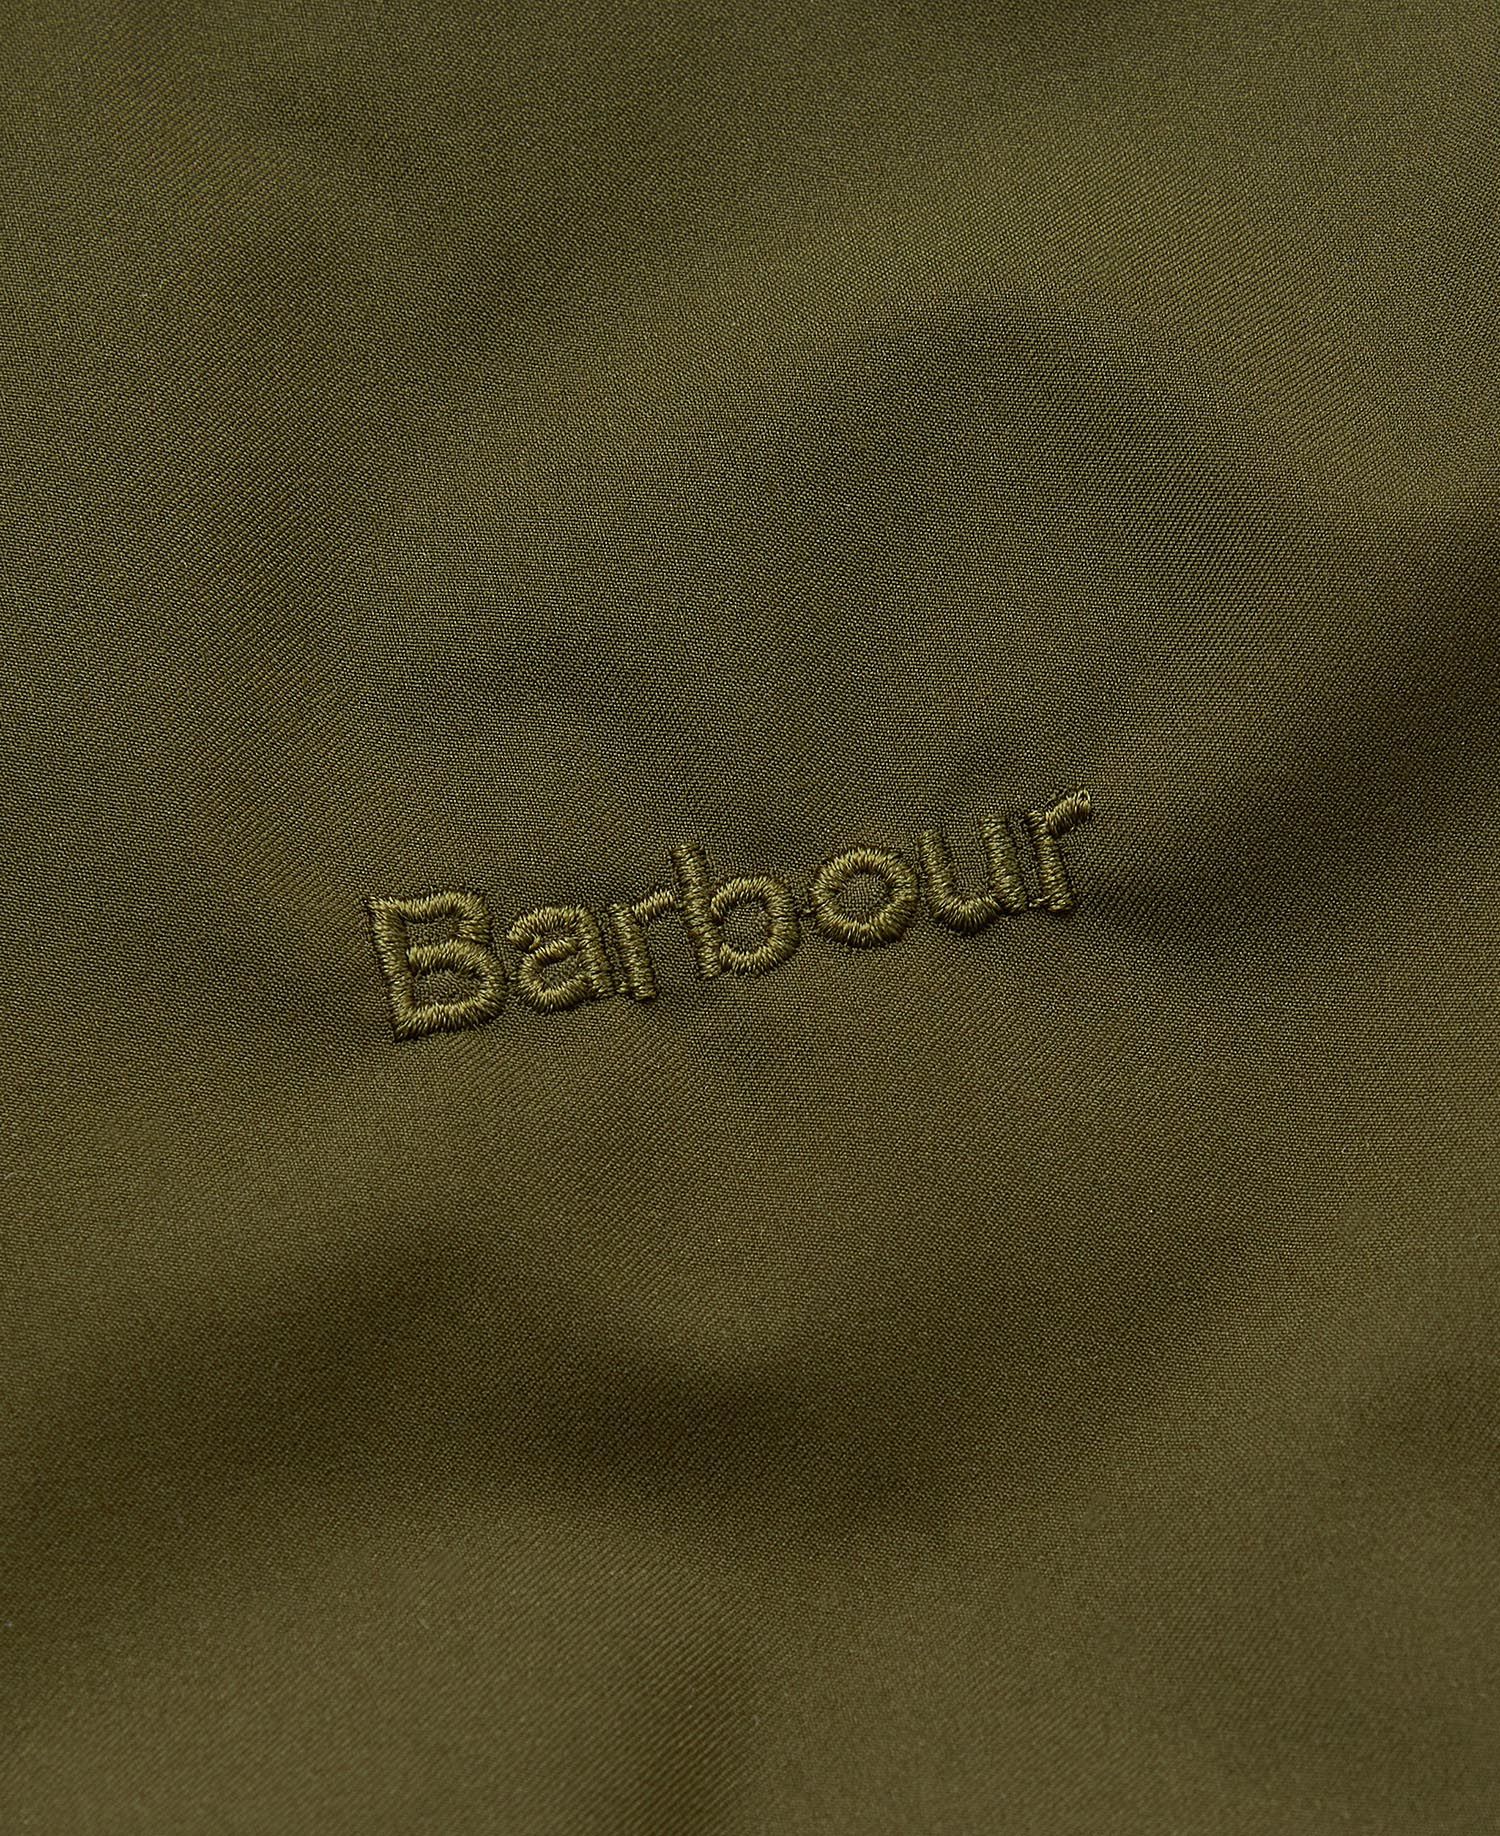 Shop the Barbour Monmouth Waterproof Dog Coat in Green | Barbour